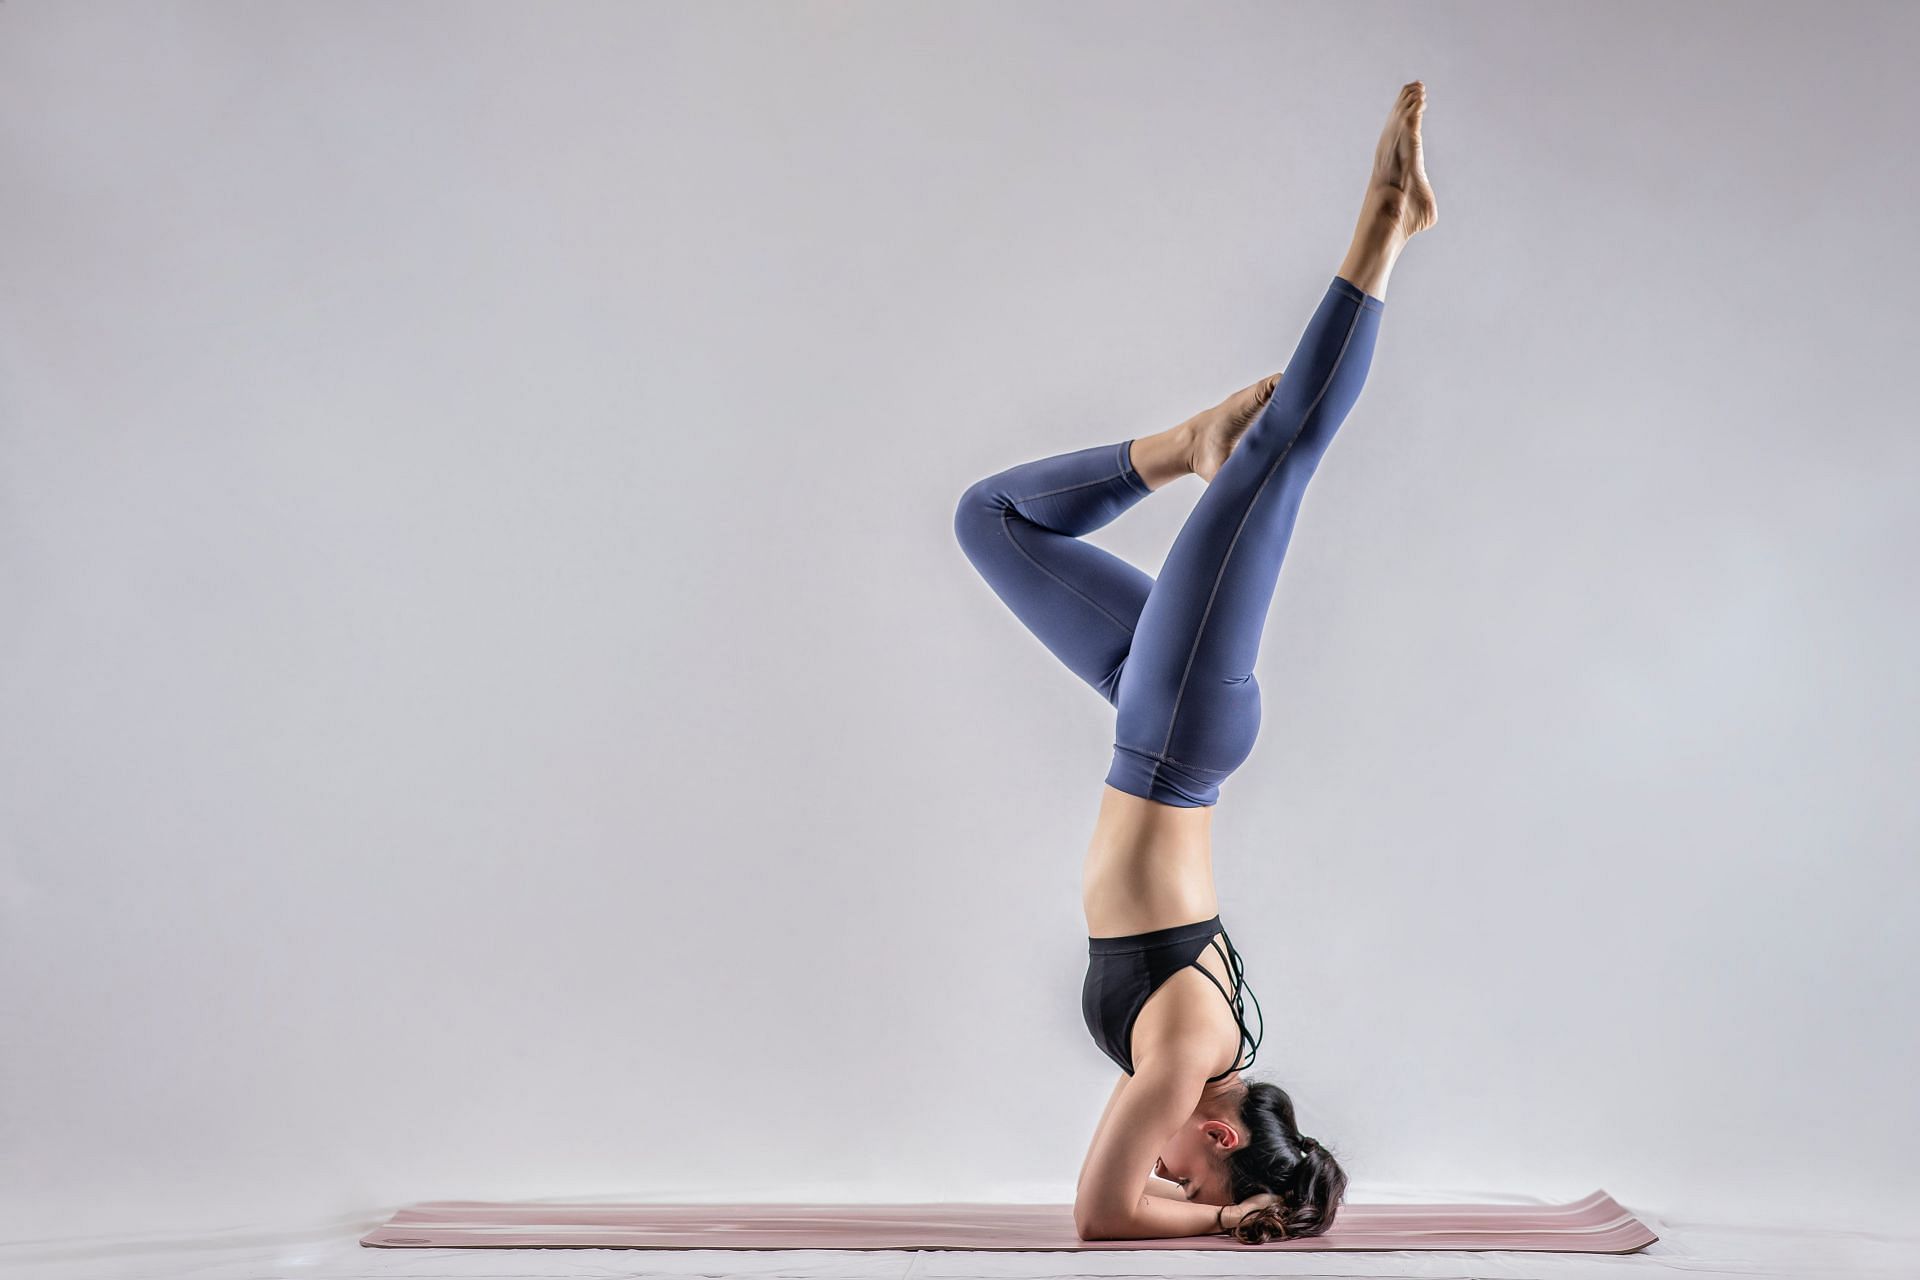 Yoga Poses - Headstand Pose